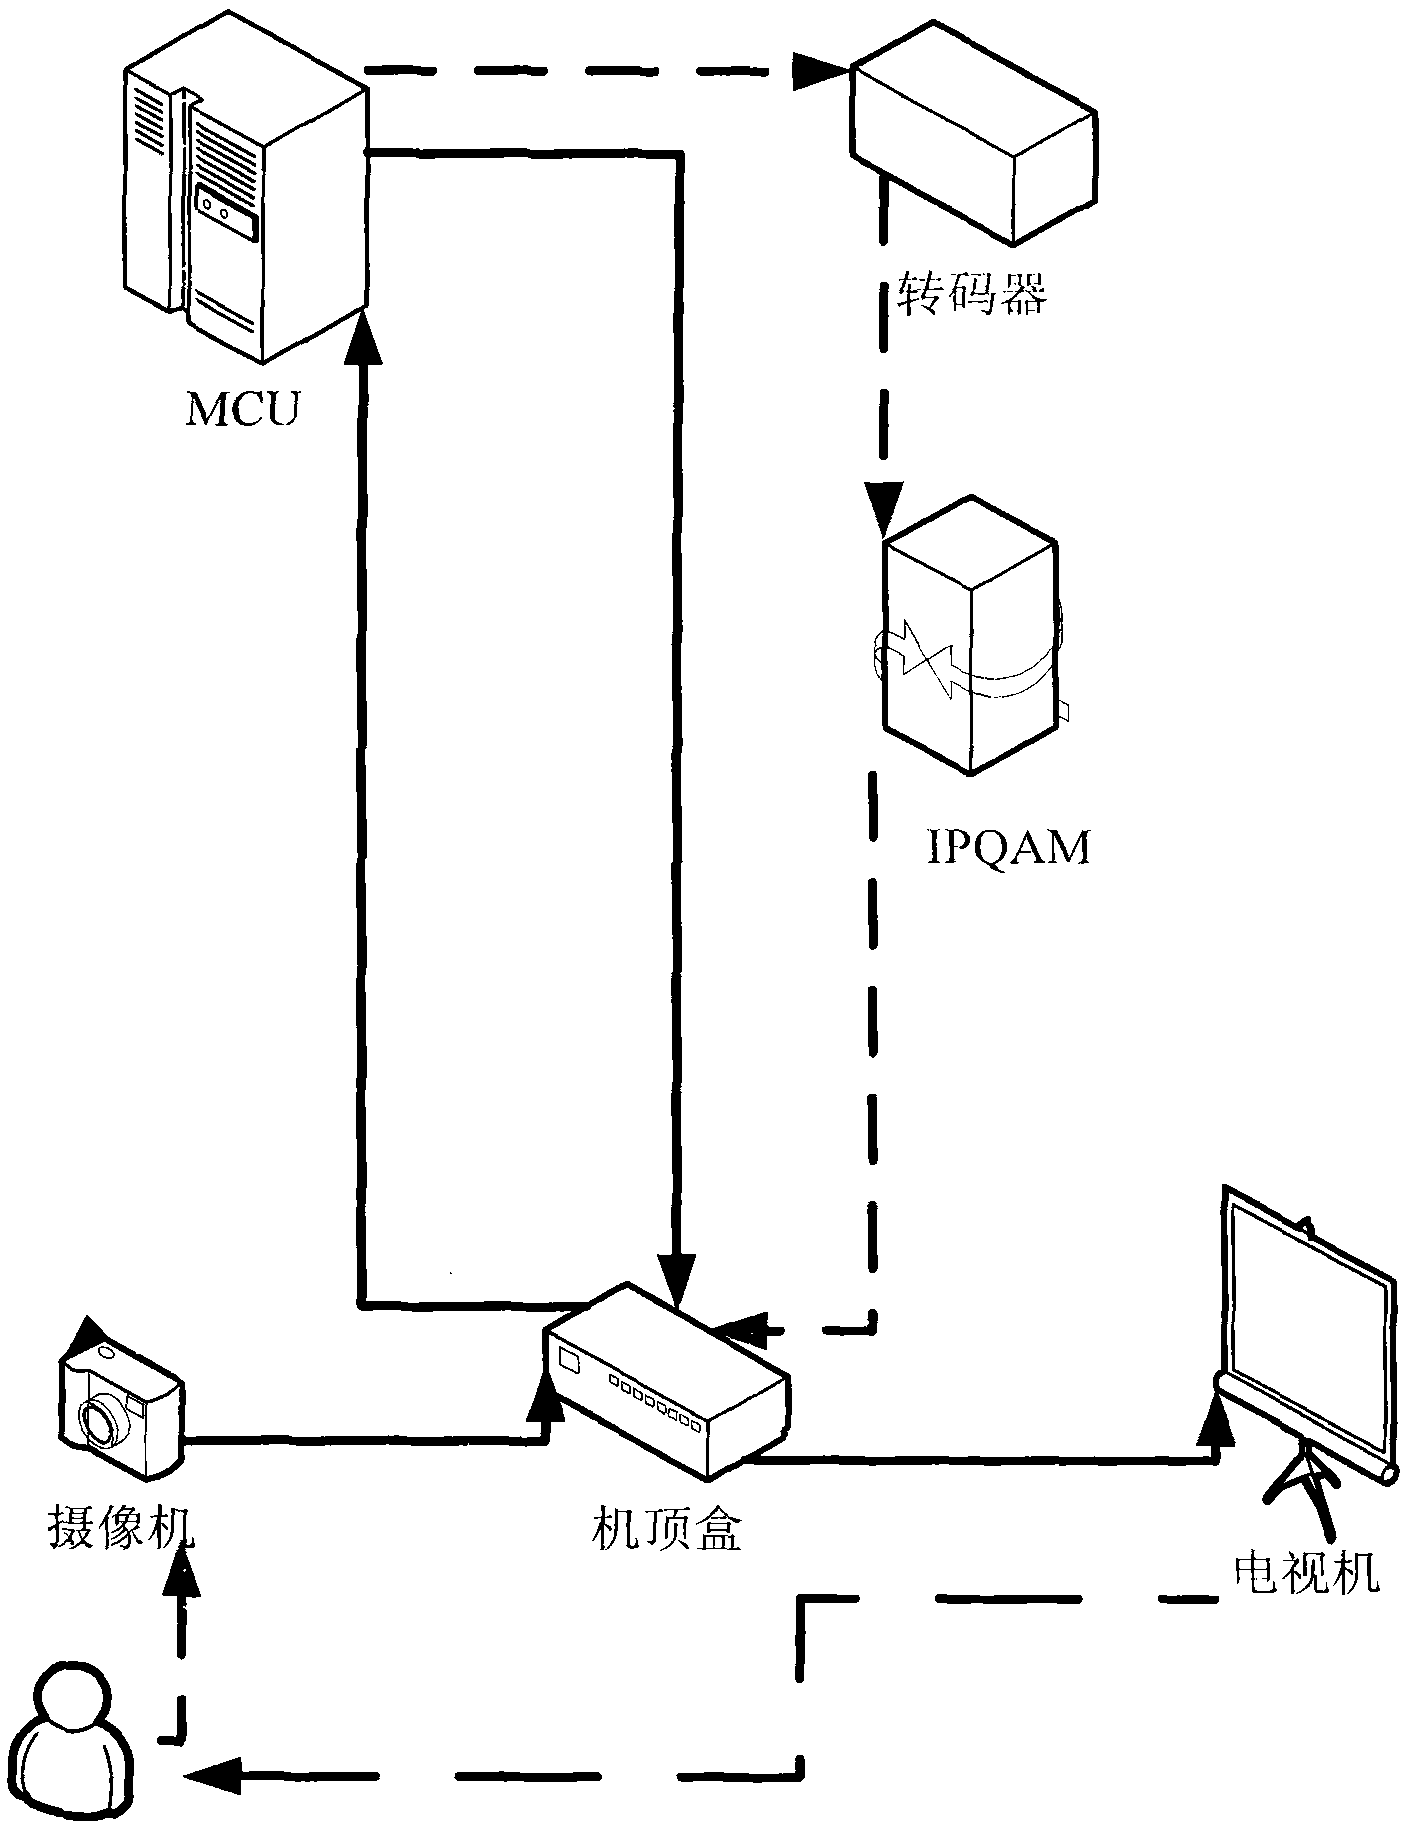 Method for carrying out video session, video session system and set top boxes (STBs)